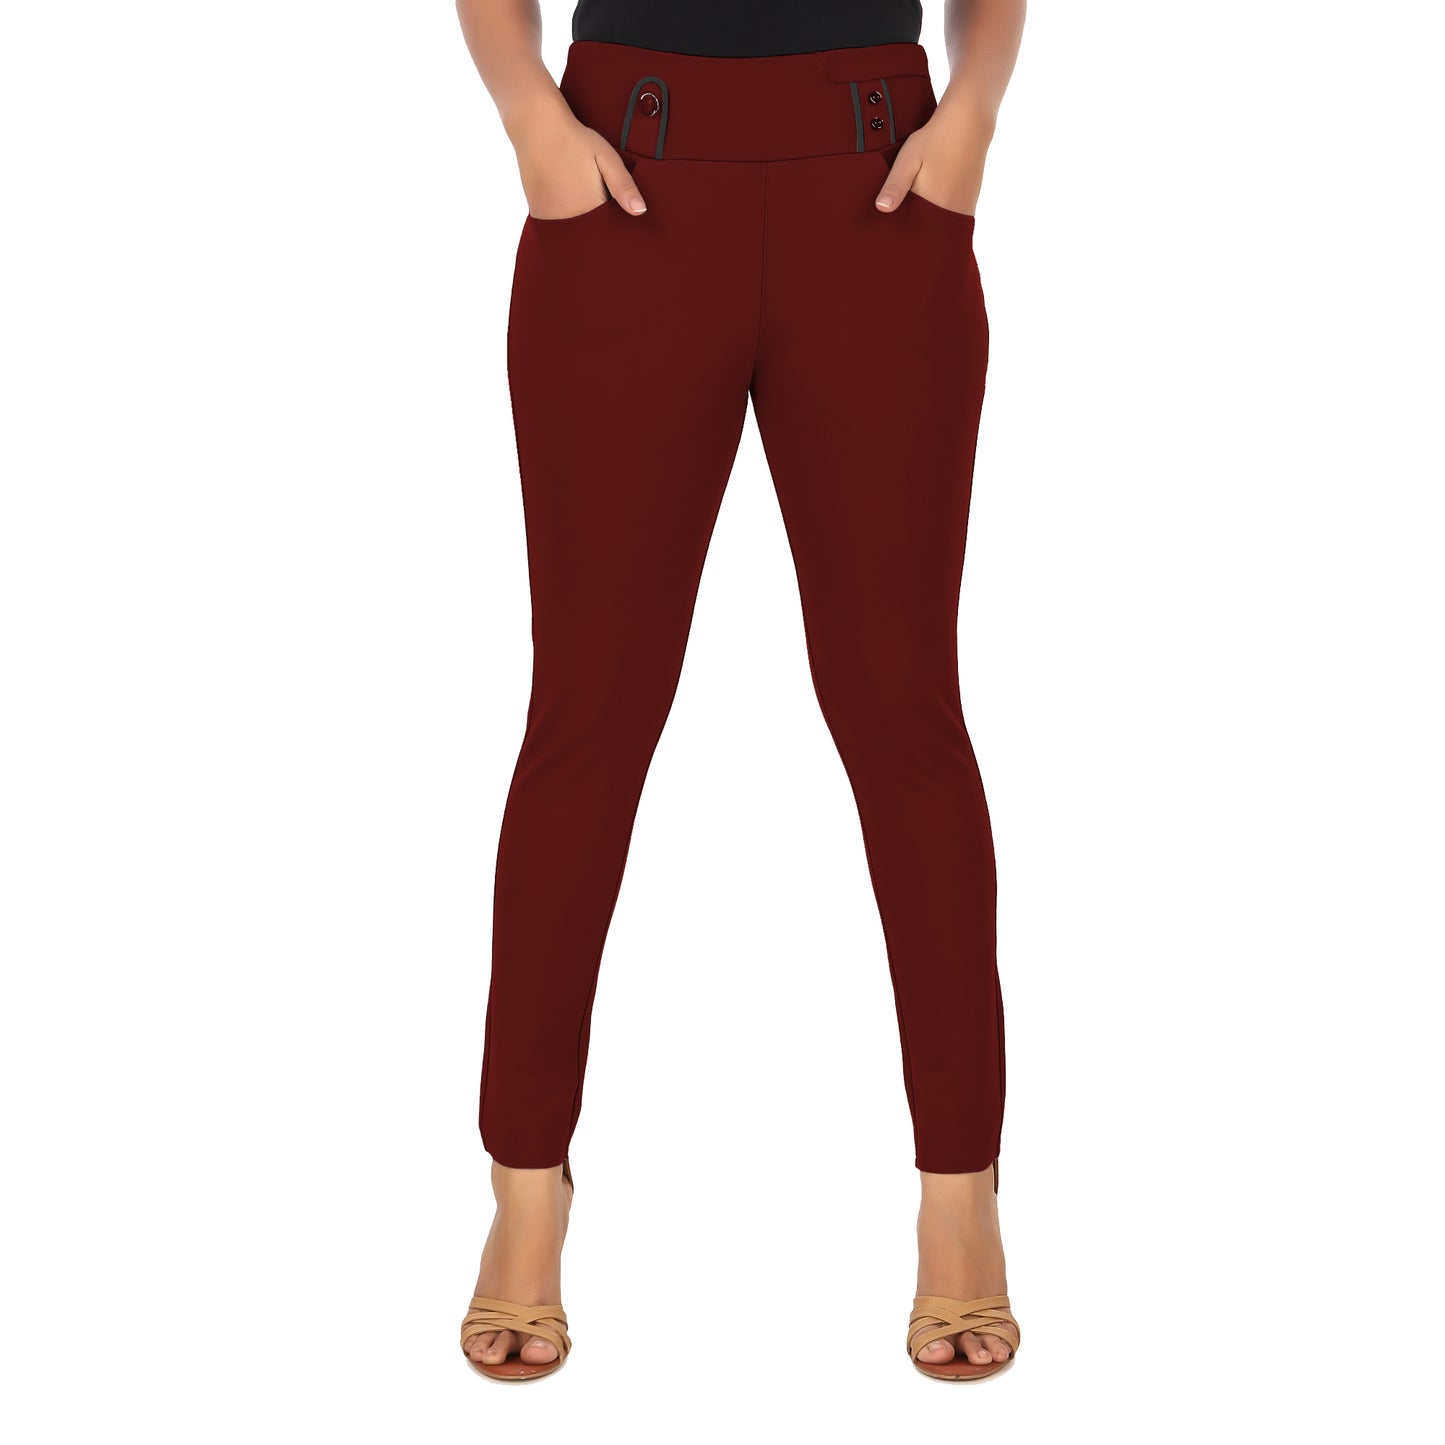 ComfortFit Women's Mid-Waist Jeggings with 2 Front Pockets - Maroon